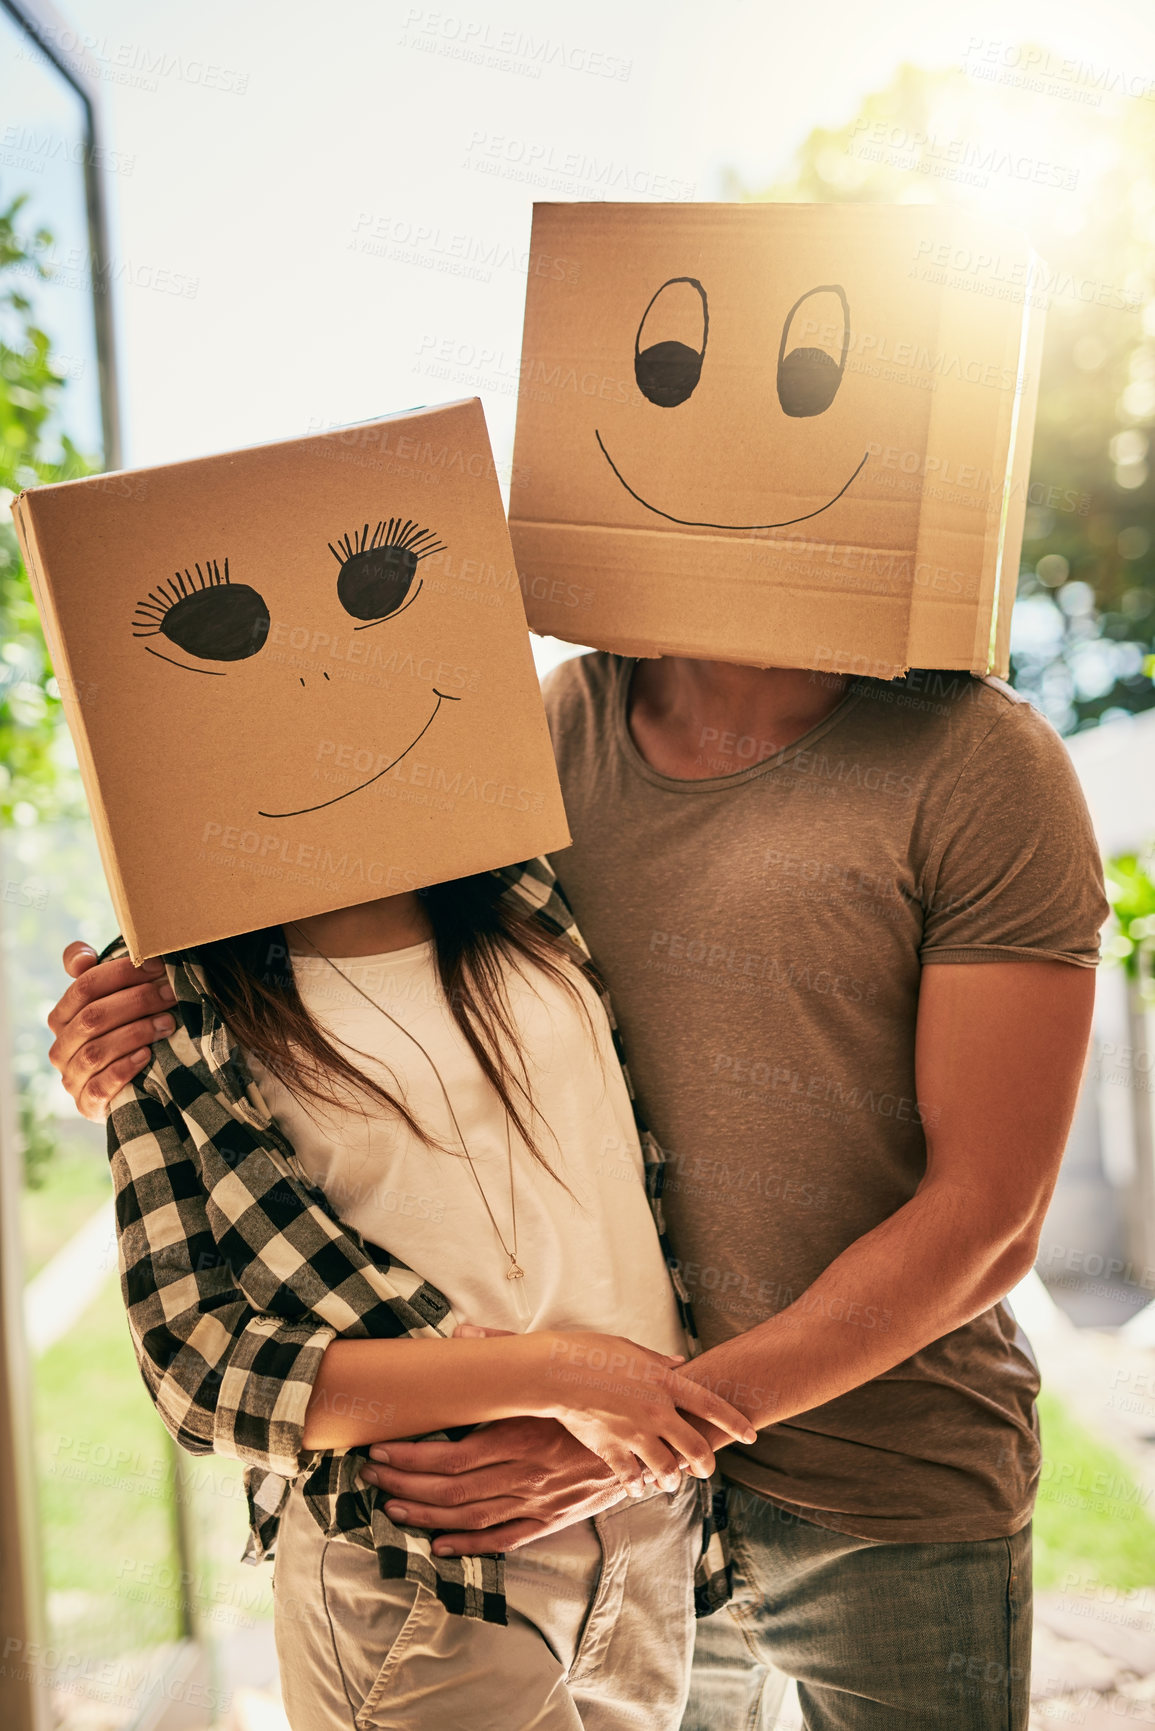 Buy stock photo Shot of a couple wearing boxes with smiley faces drawn on them on their heads